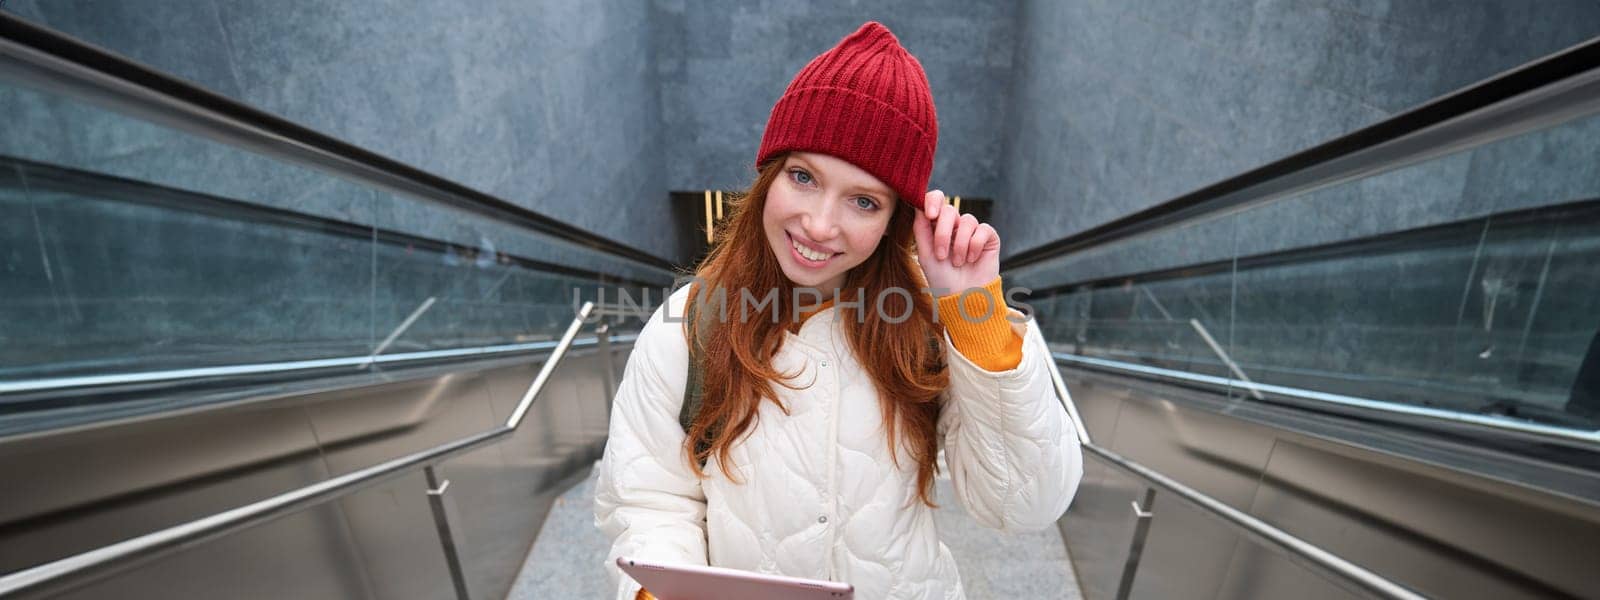 Smiling redhead woman walking up stairs with digital tablet, using gadget application while going somewhere in city.